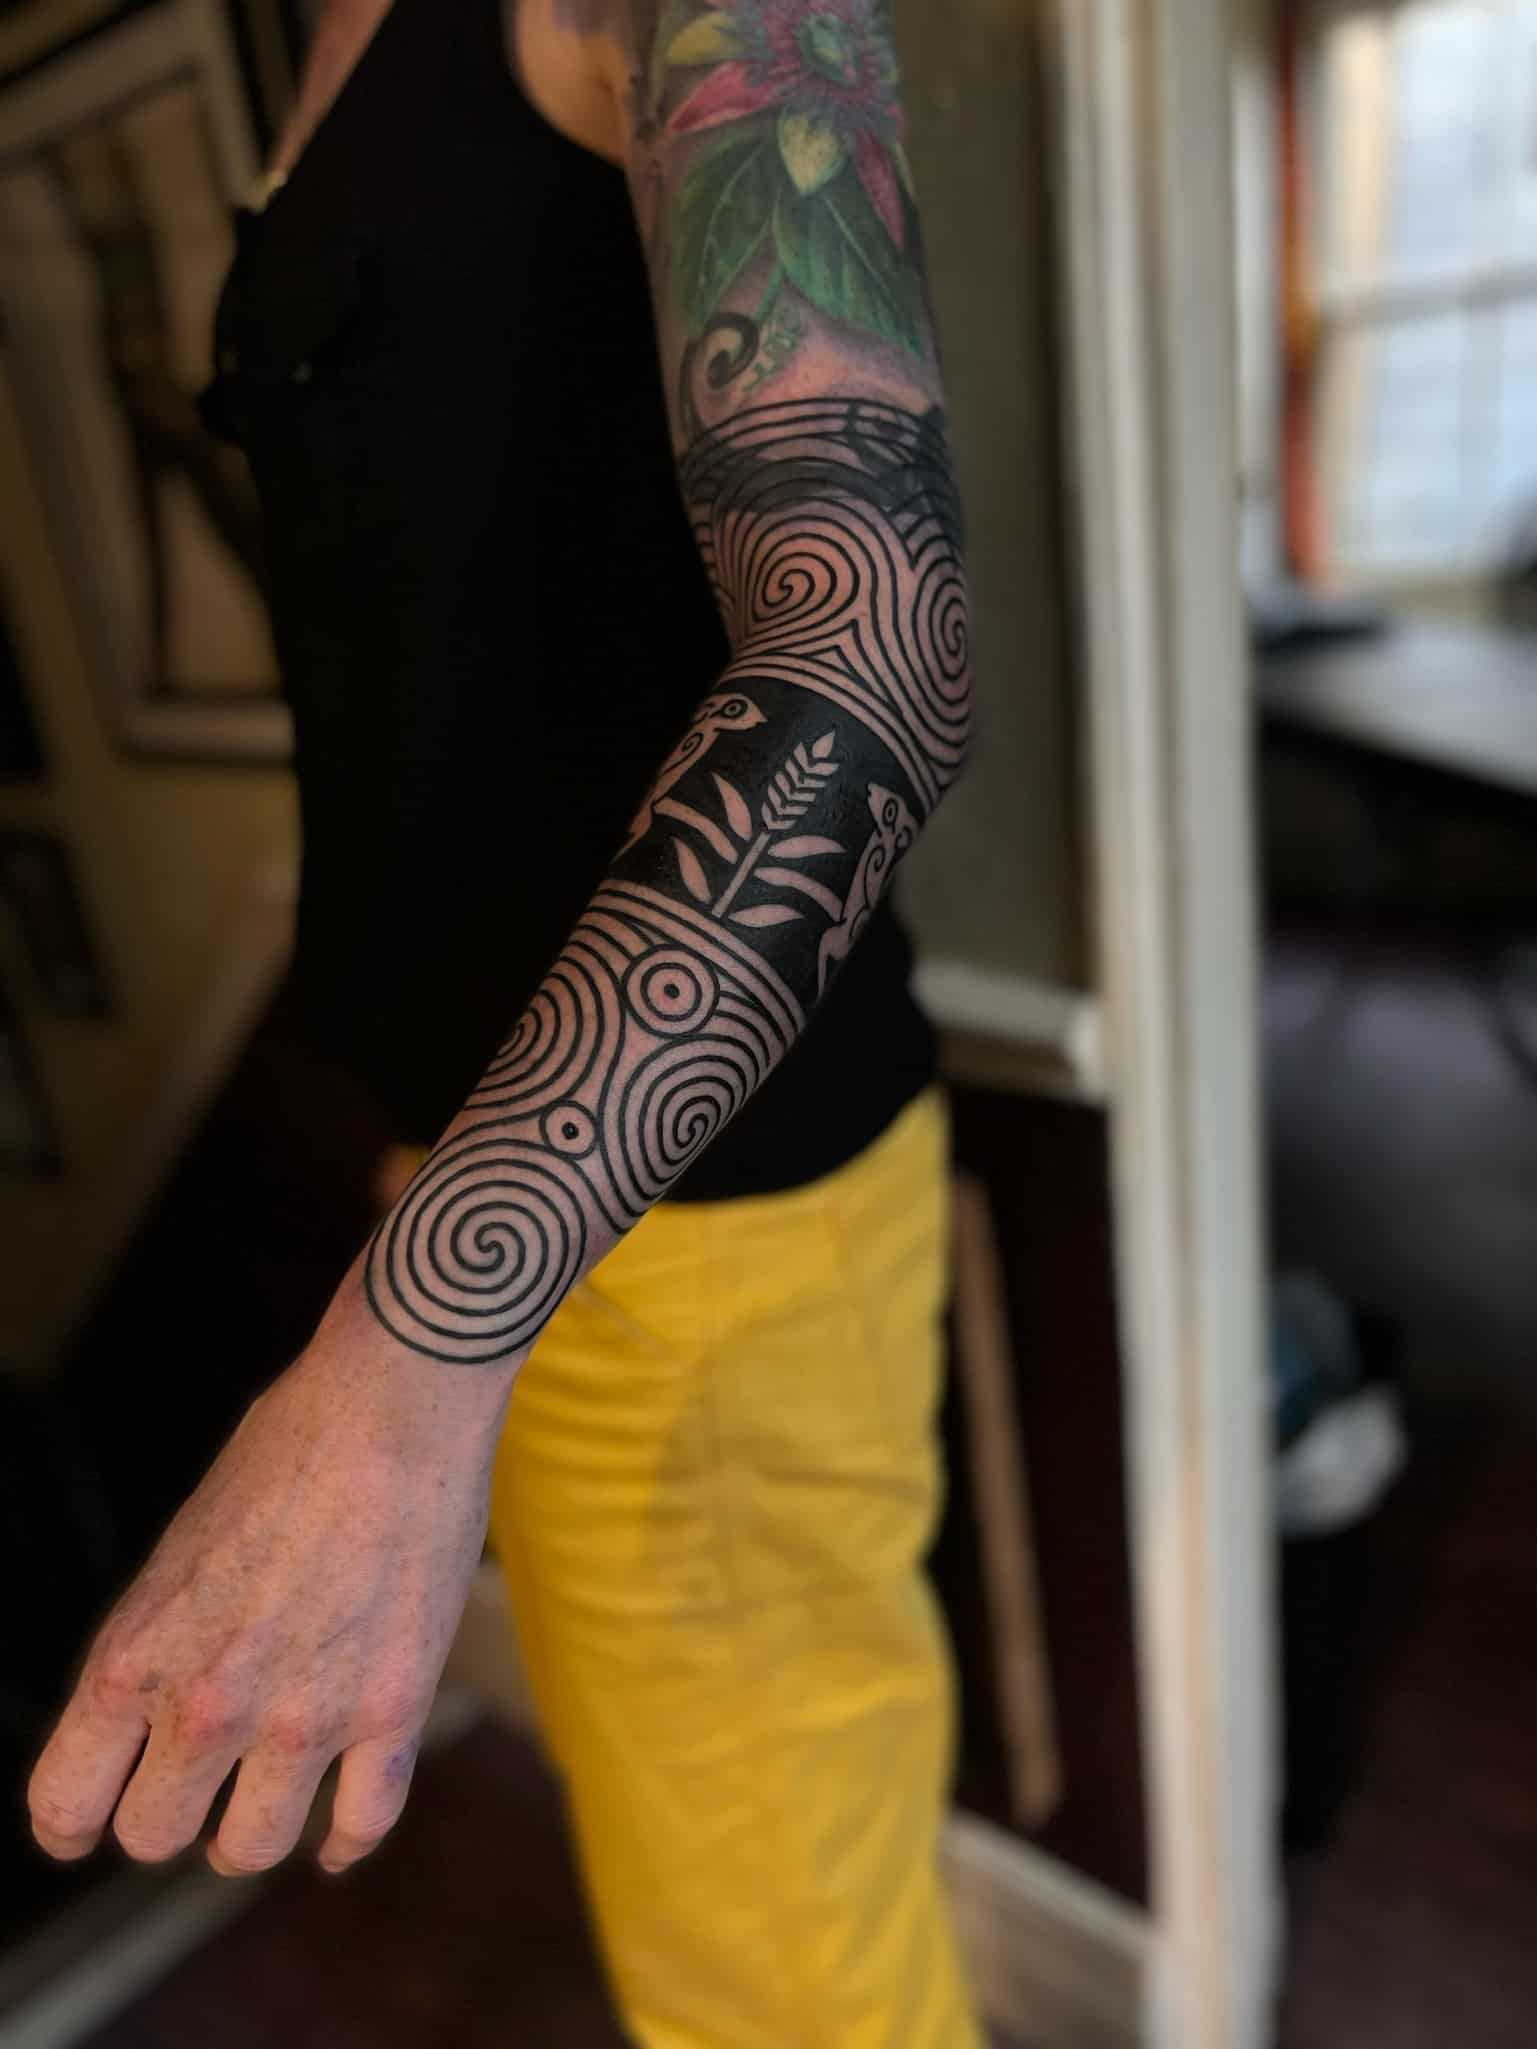 Irish-American here. My tattoo really advertises how much of a Yank I am,  doesn't it? : r/ireland